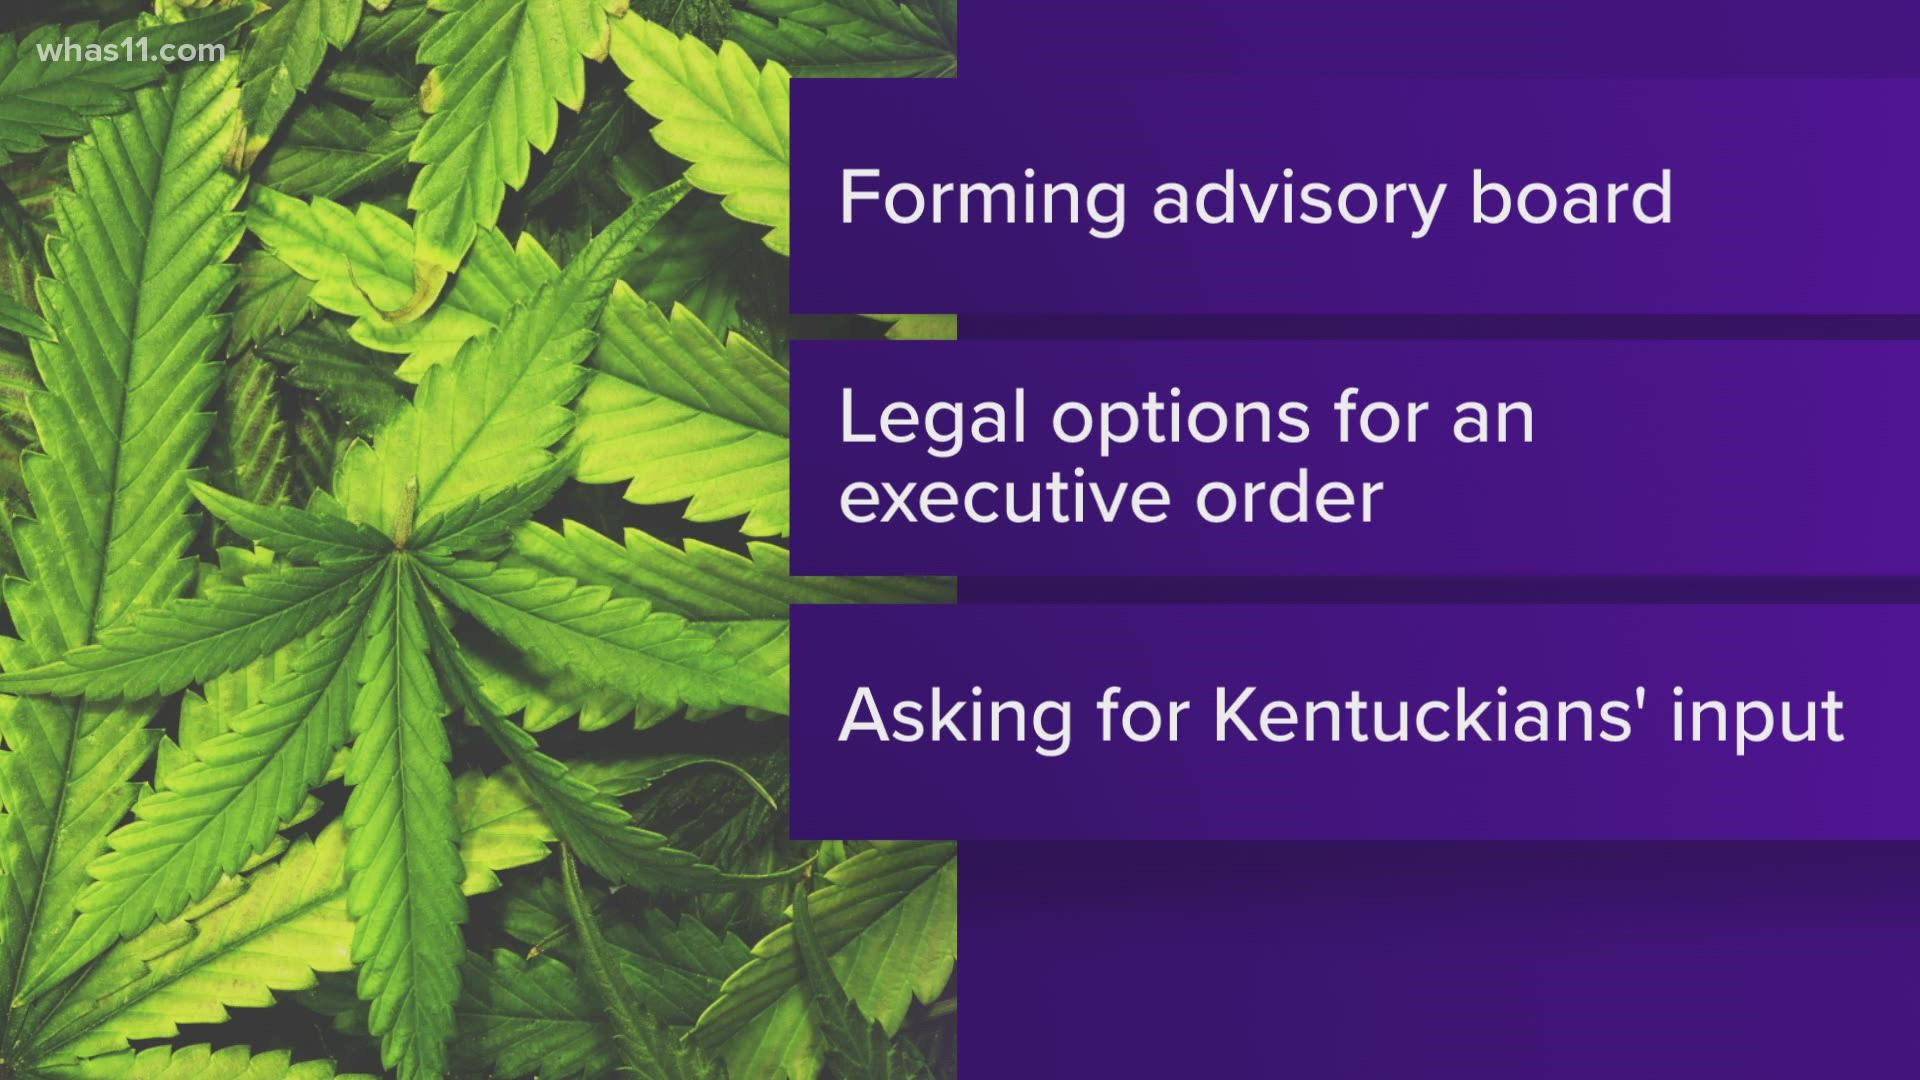 Beshear said he would create an advisory board that will travel across Kentucky and ask Kentuckians where they stand on legalizing medical marijuana.